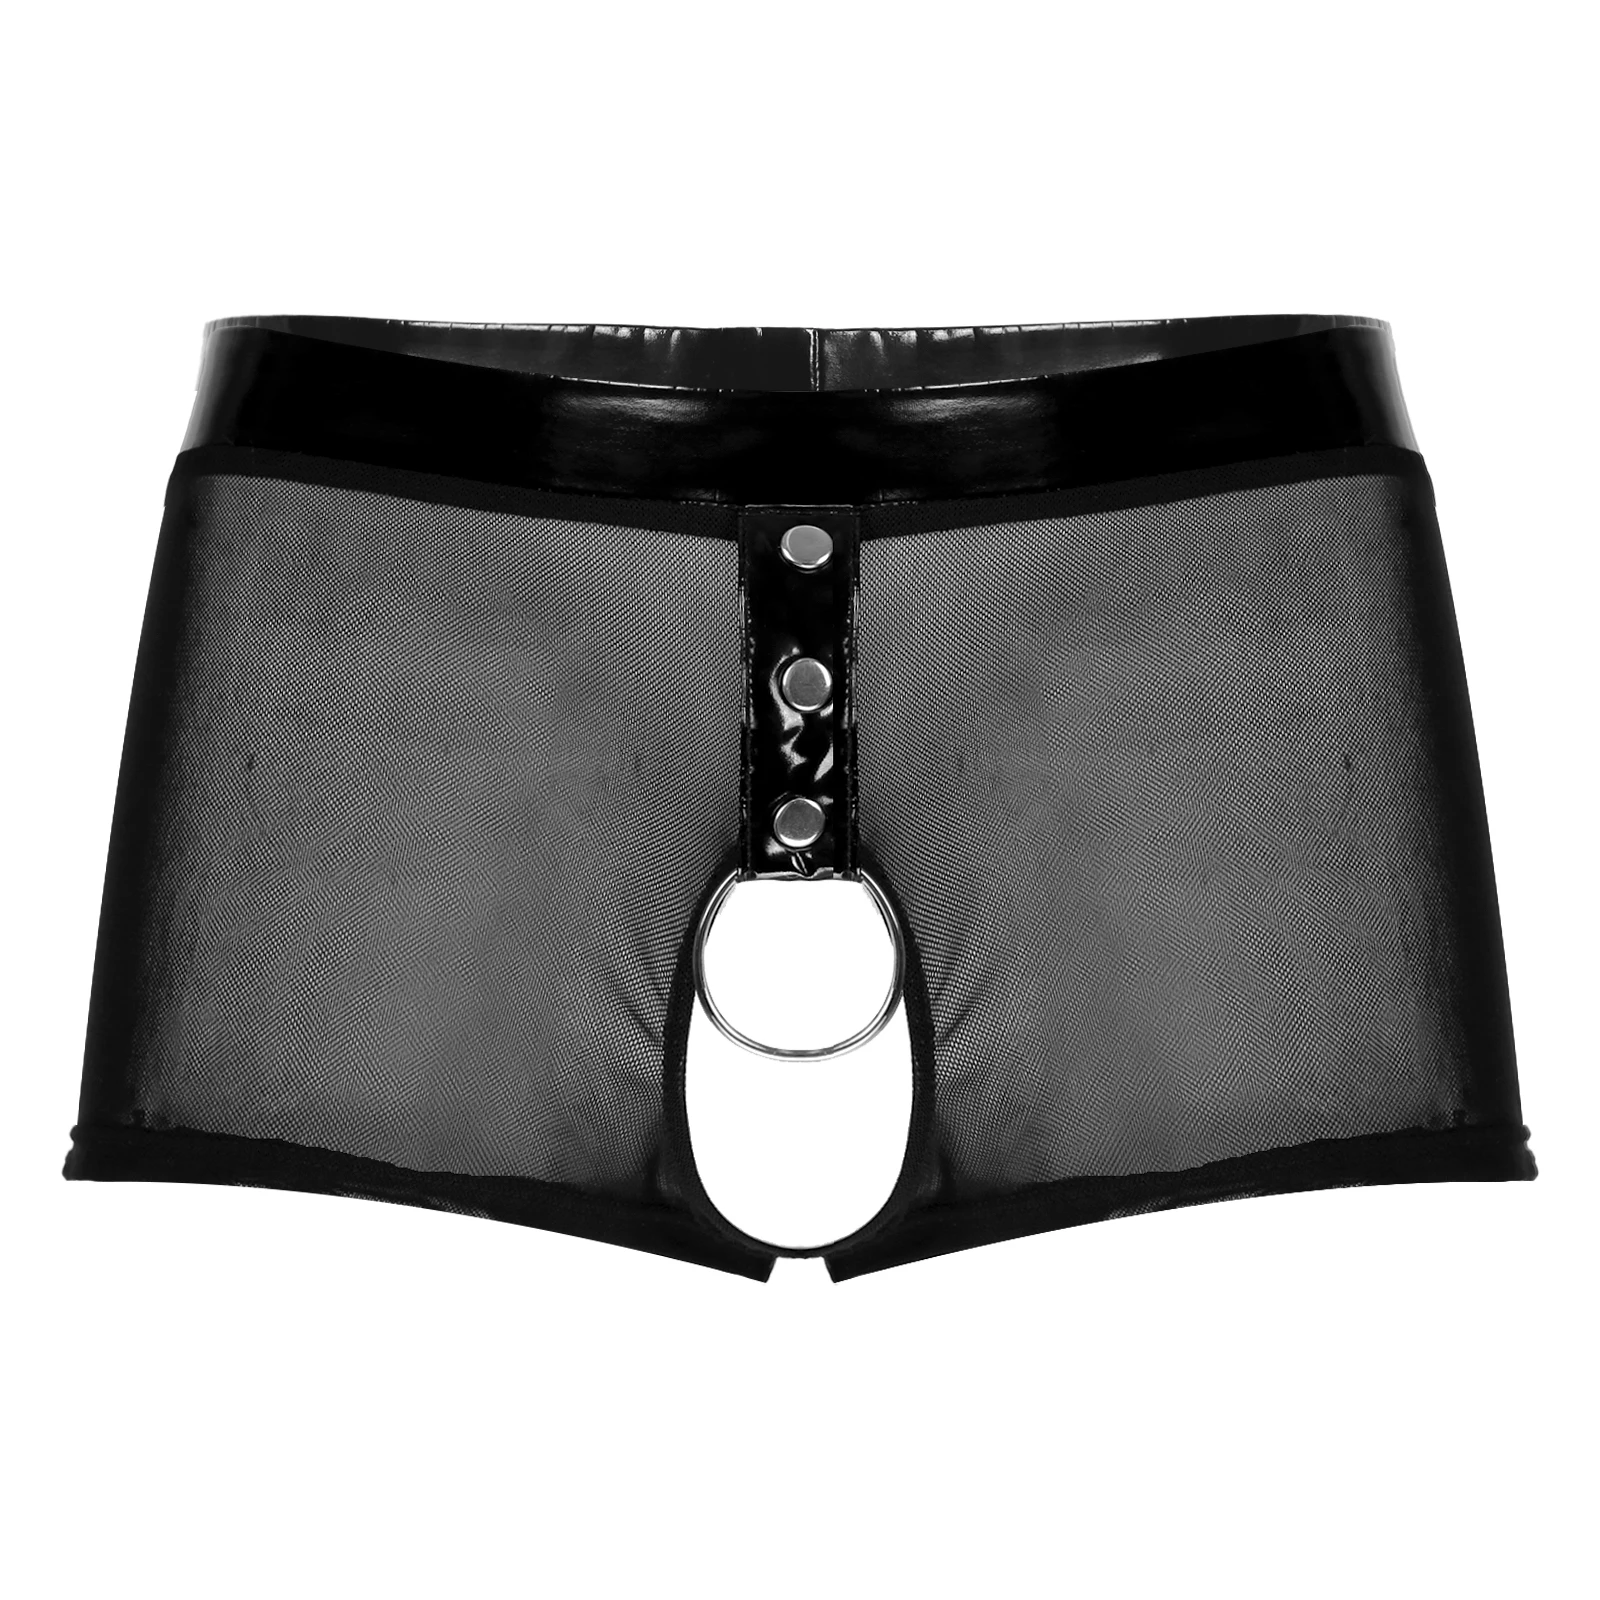 most comfortable boxer briefs Mens Sexy Lingerie Erotic Open Crotch Panties Crotchless Underwear Underpants O Ring See Through Mesh Underwear with A Hole cotton boxer shorts